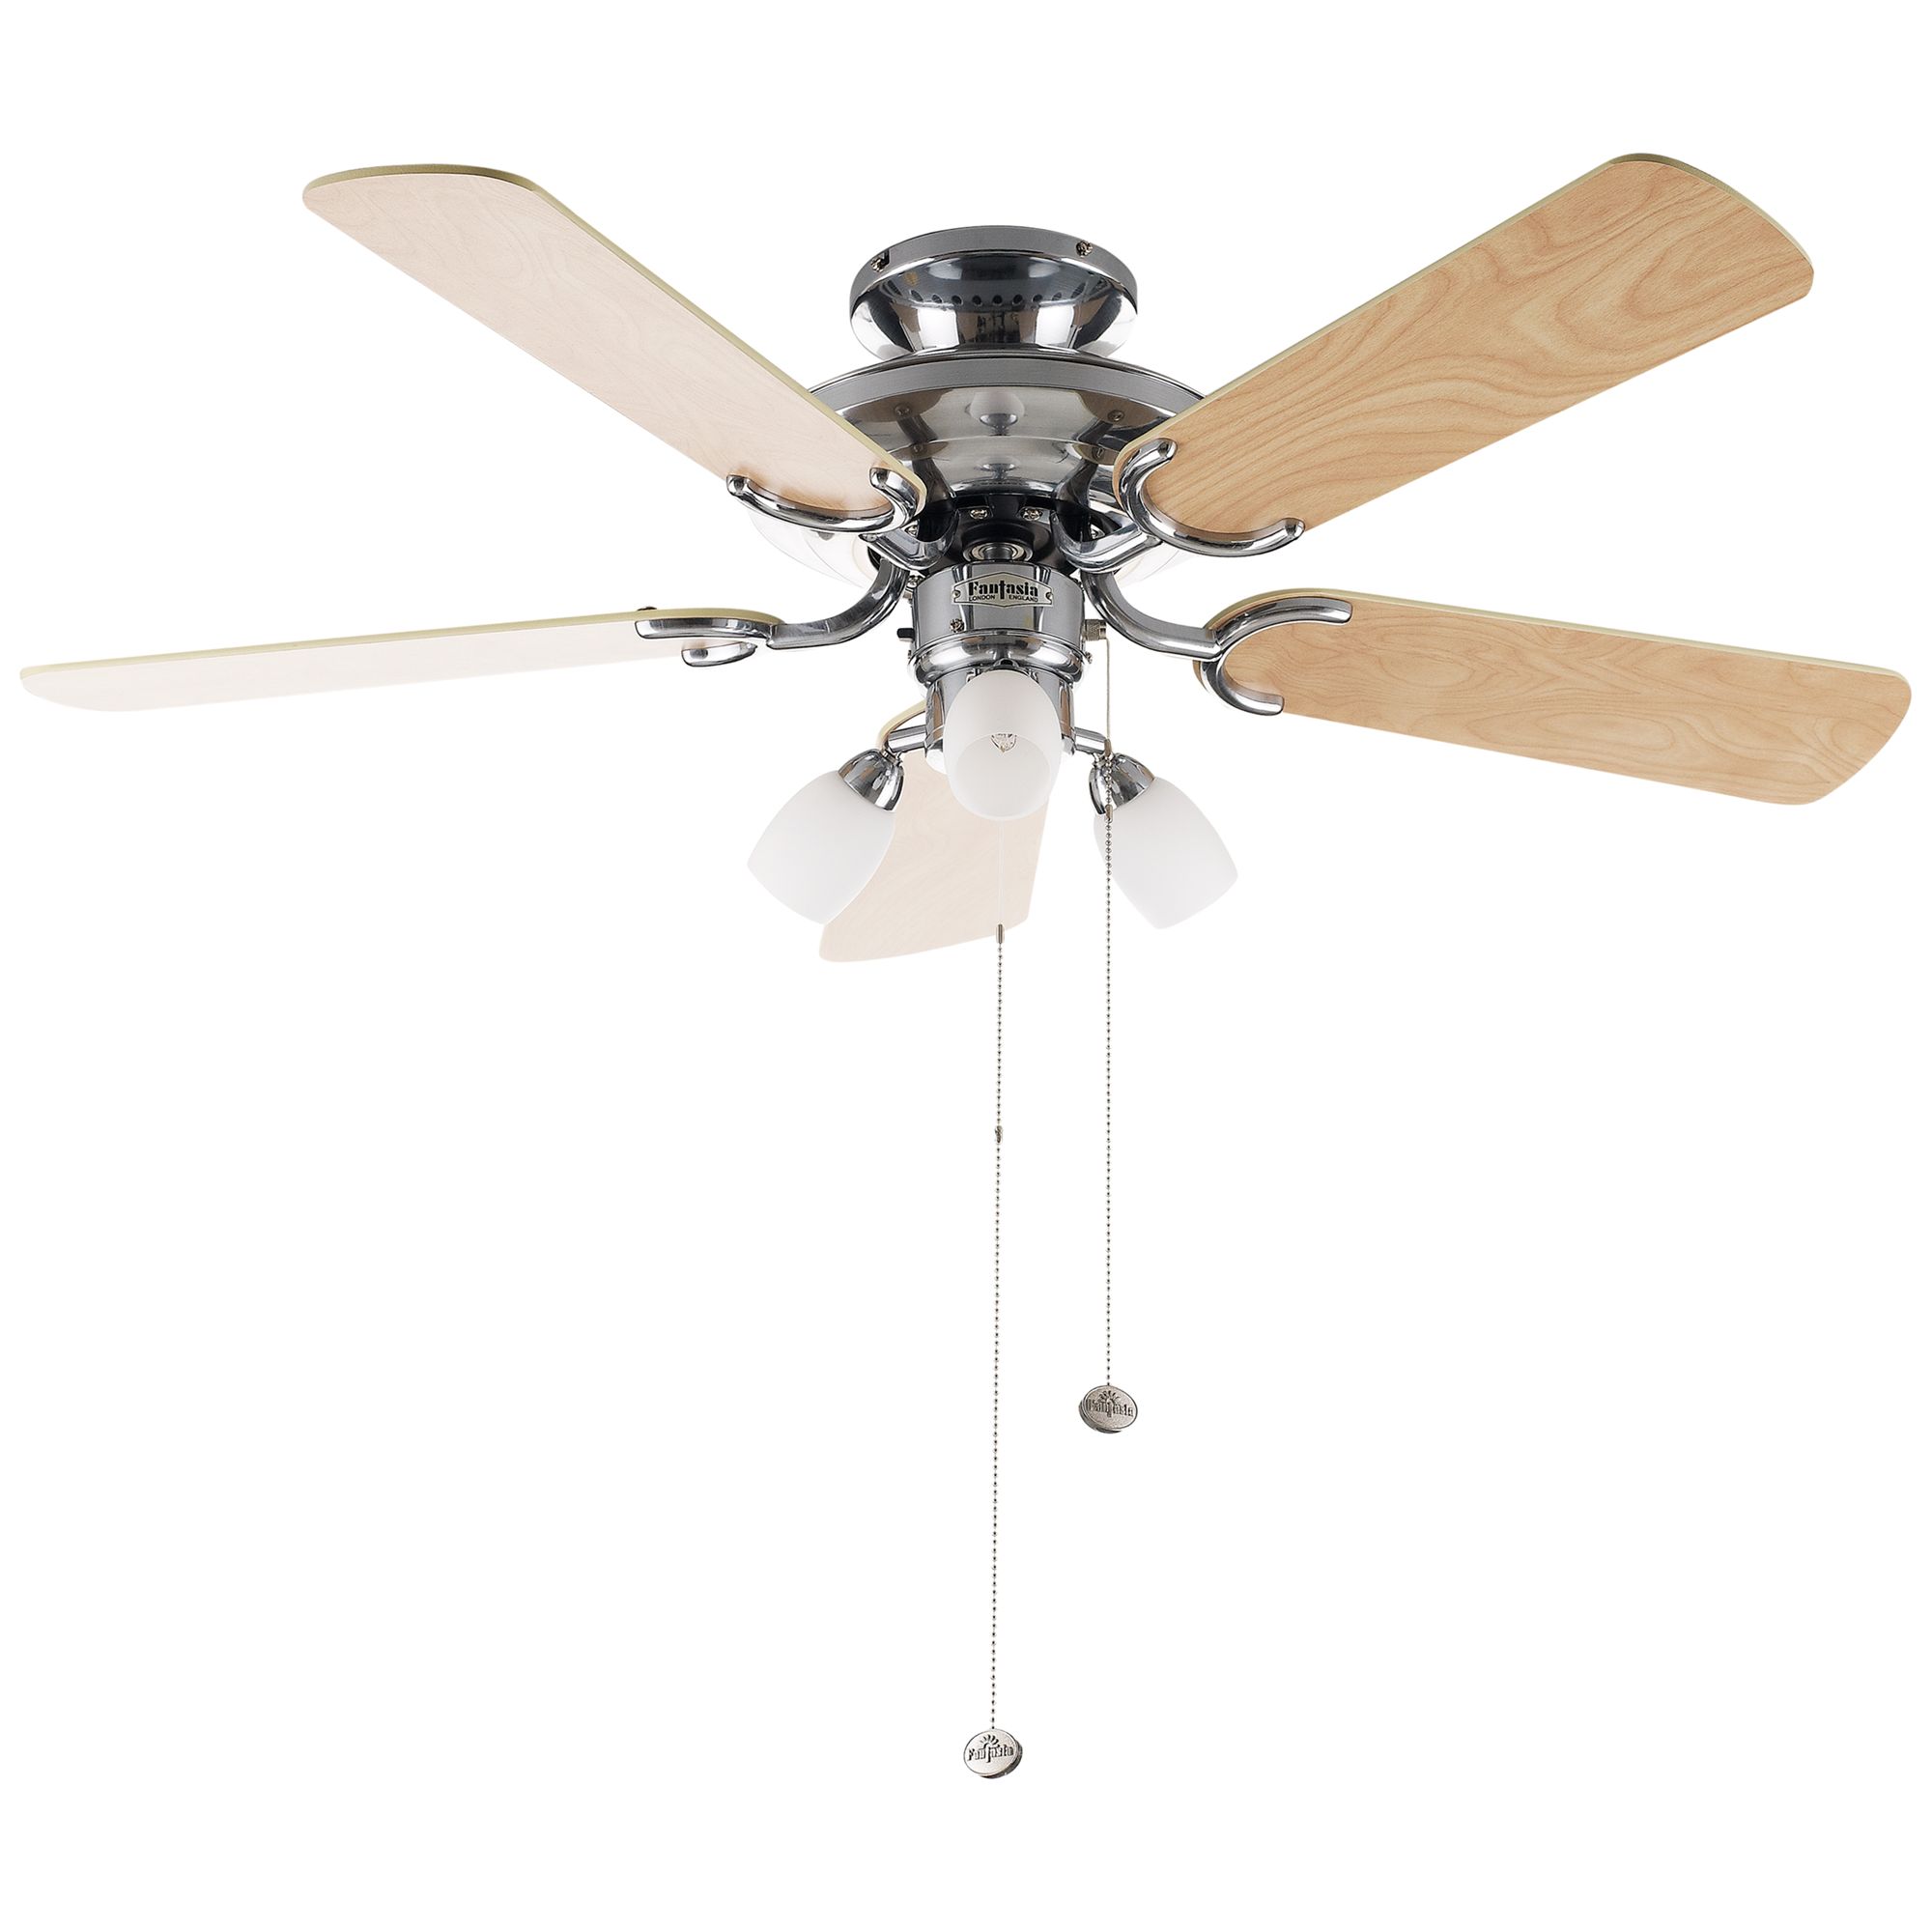 Fantasia Mayfair Ceiling Fan and Light, Stainless Steel at John Lewis